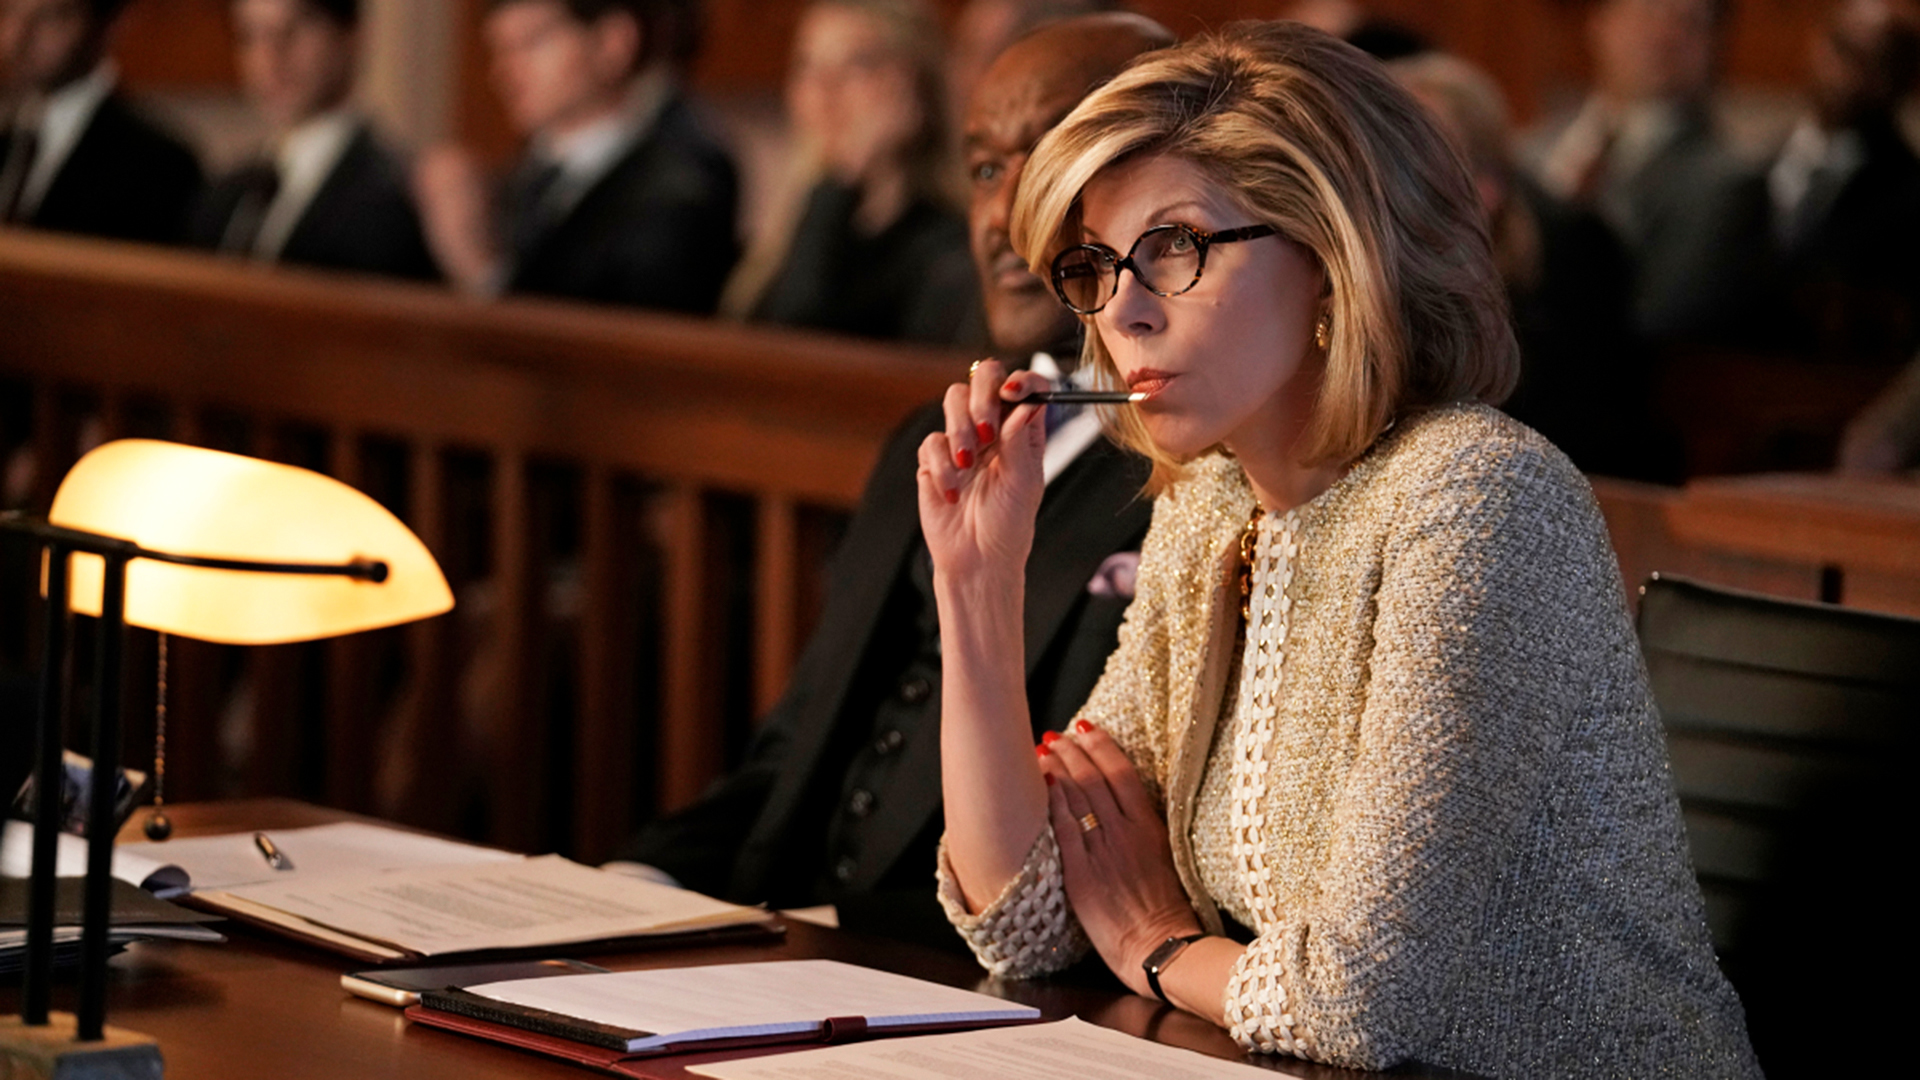 ‘the good fight’ continues: for his next trick, kurt makes diane’s felony disappear